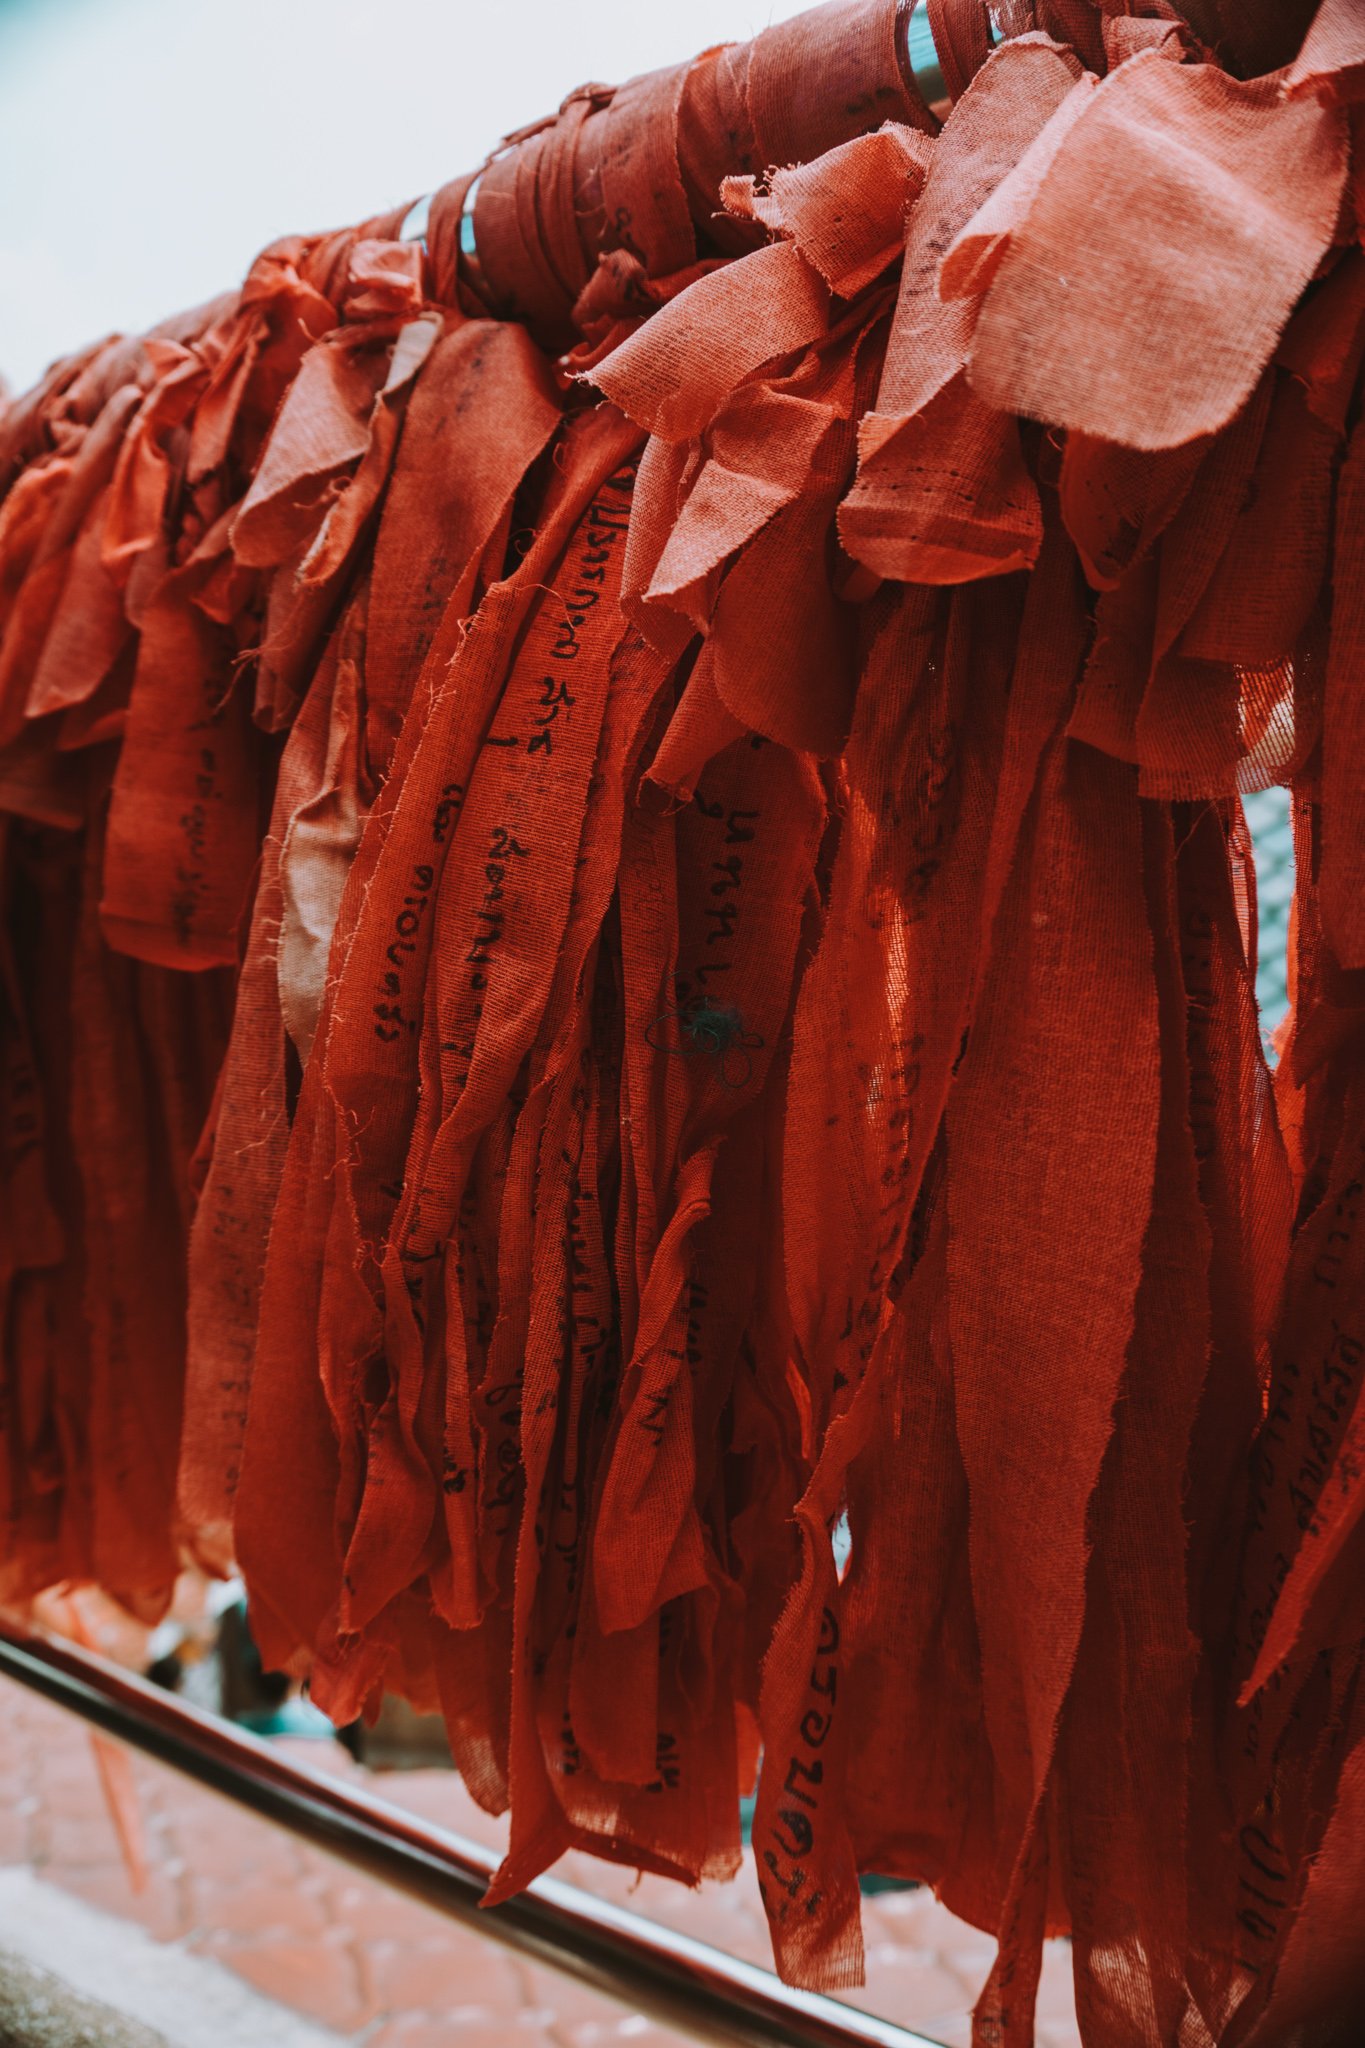 blessed cloth hanging in the Wat Samphran temple grounds